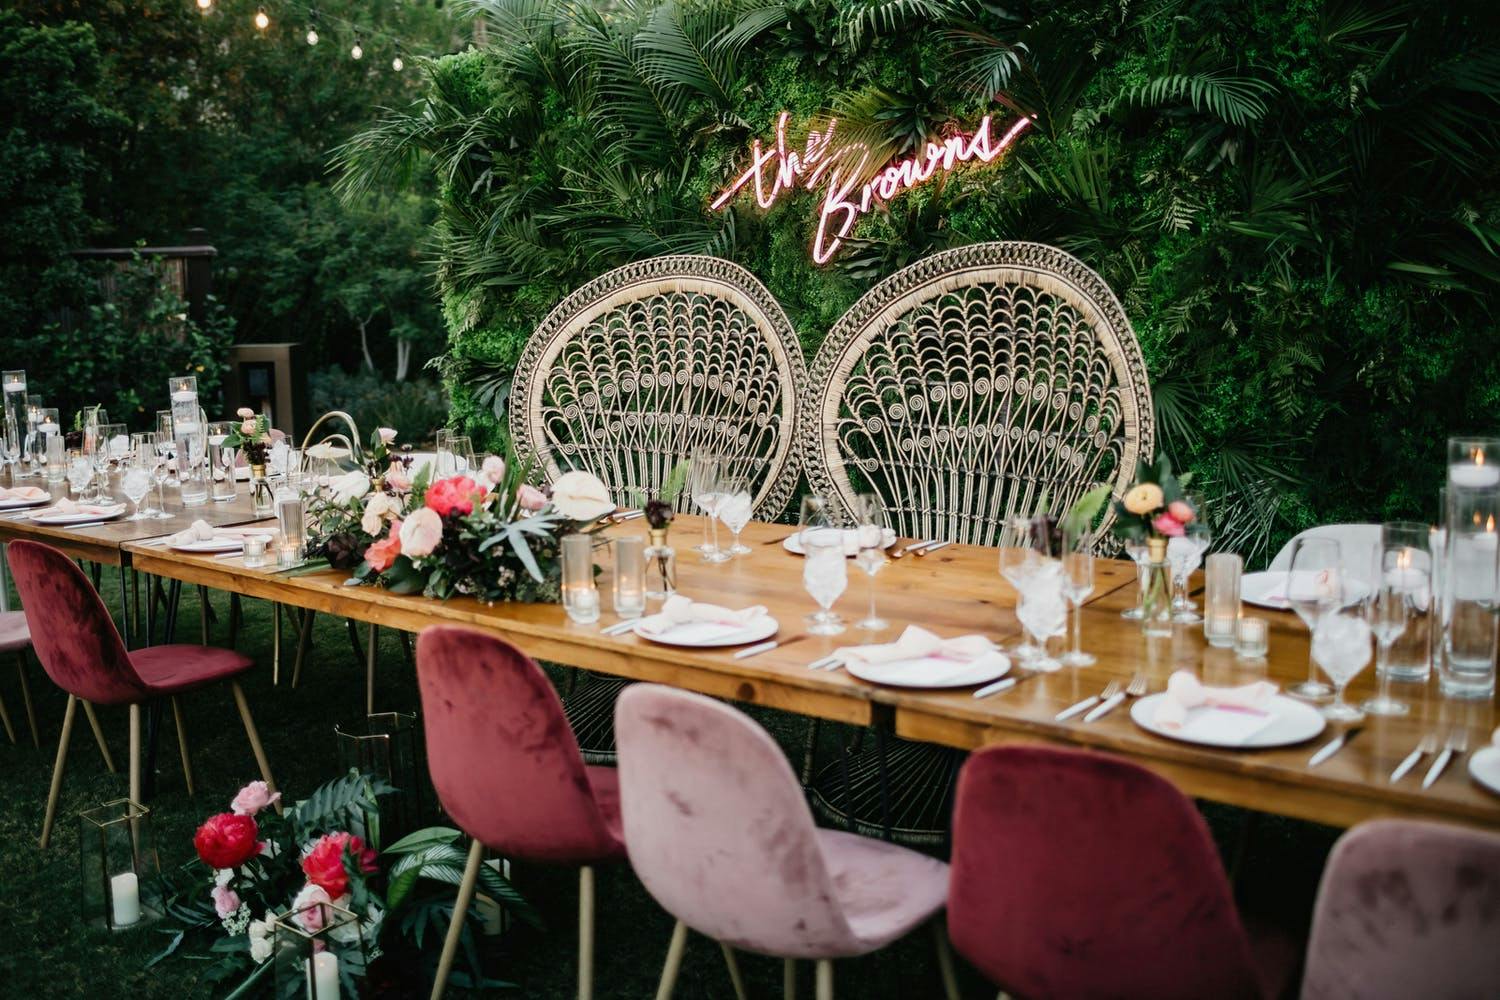 Top wedding of 2020 with a tropical theme and boho style | PartySlate